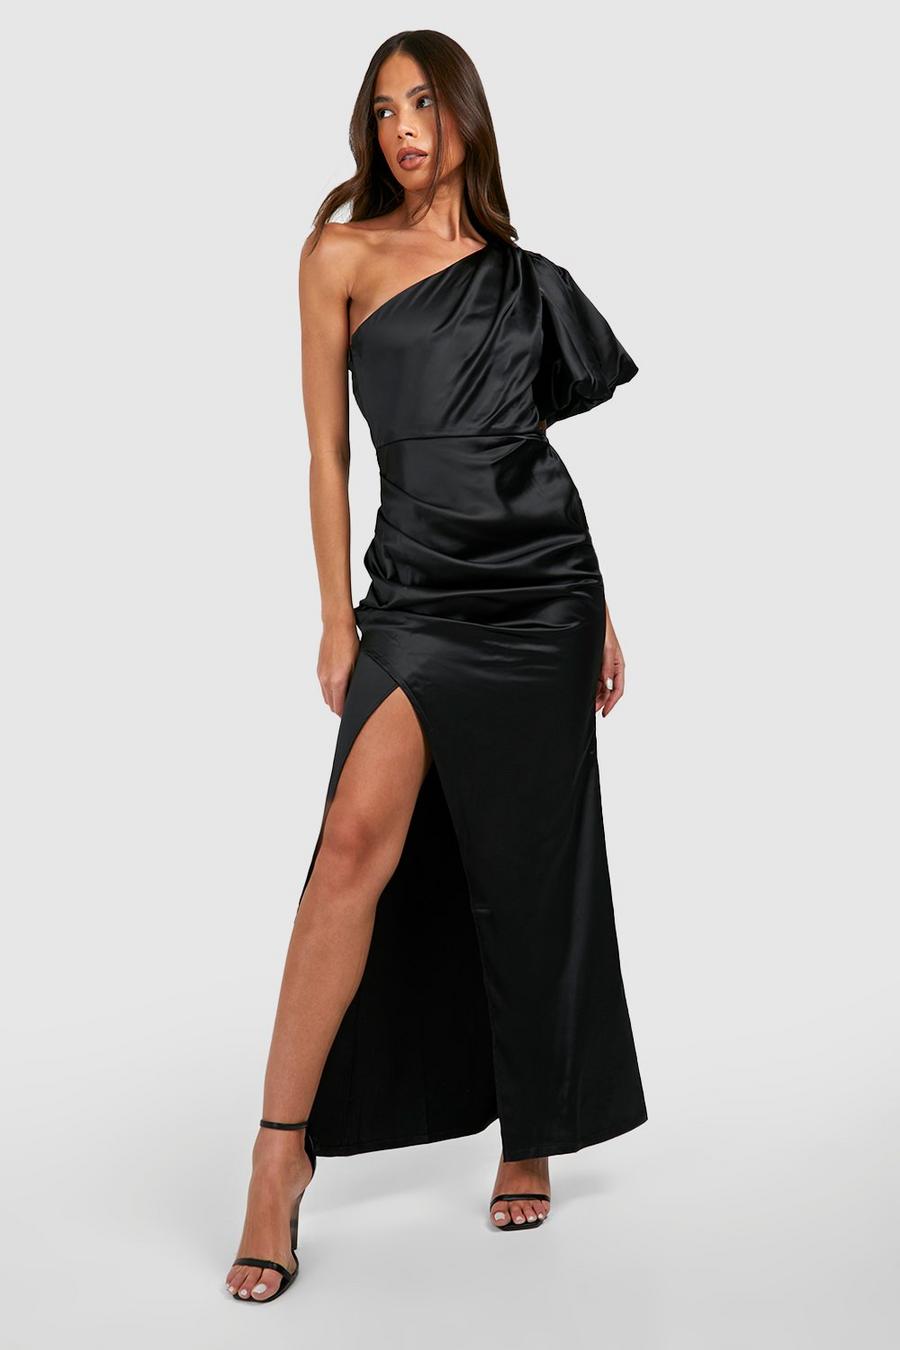 Long Black Dresses, Evening Gowns In Black